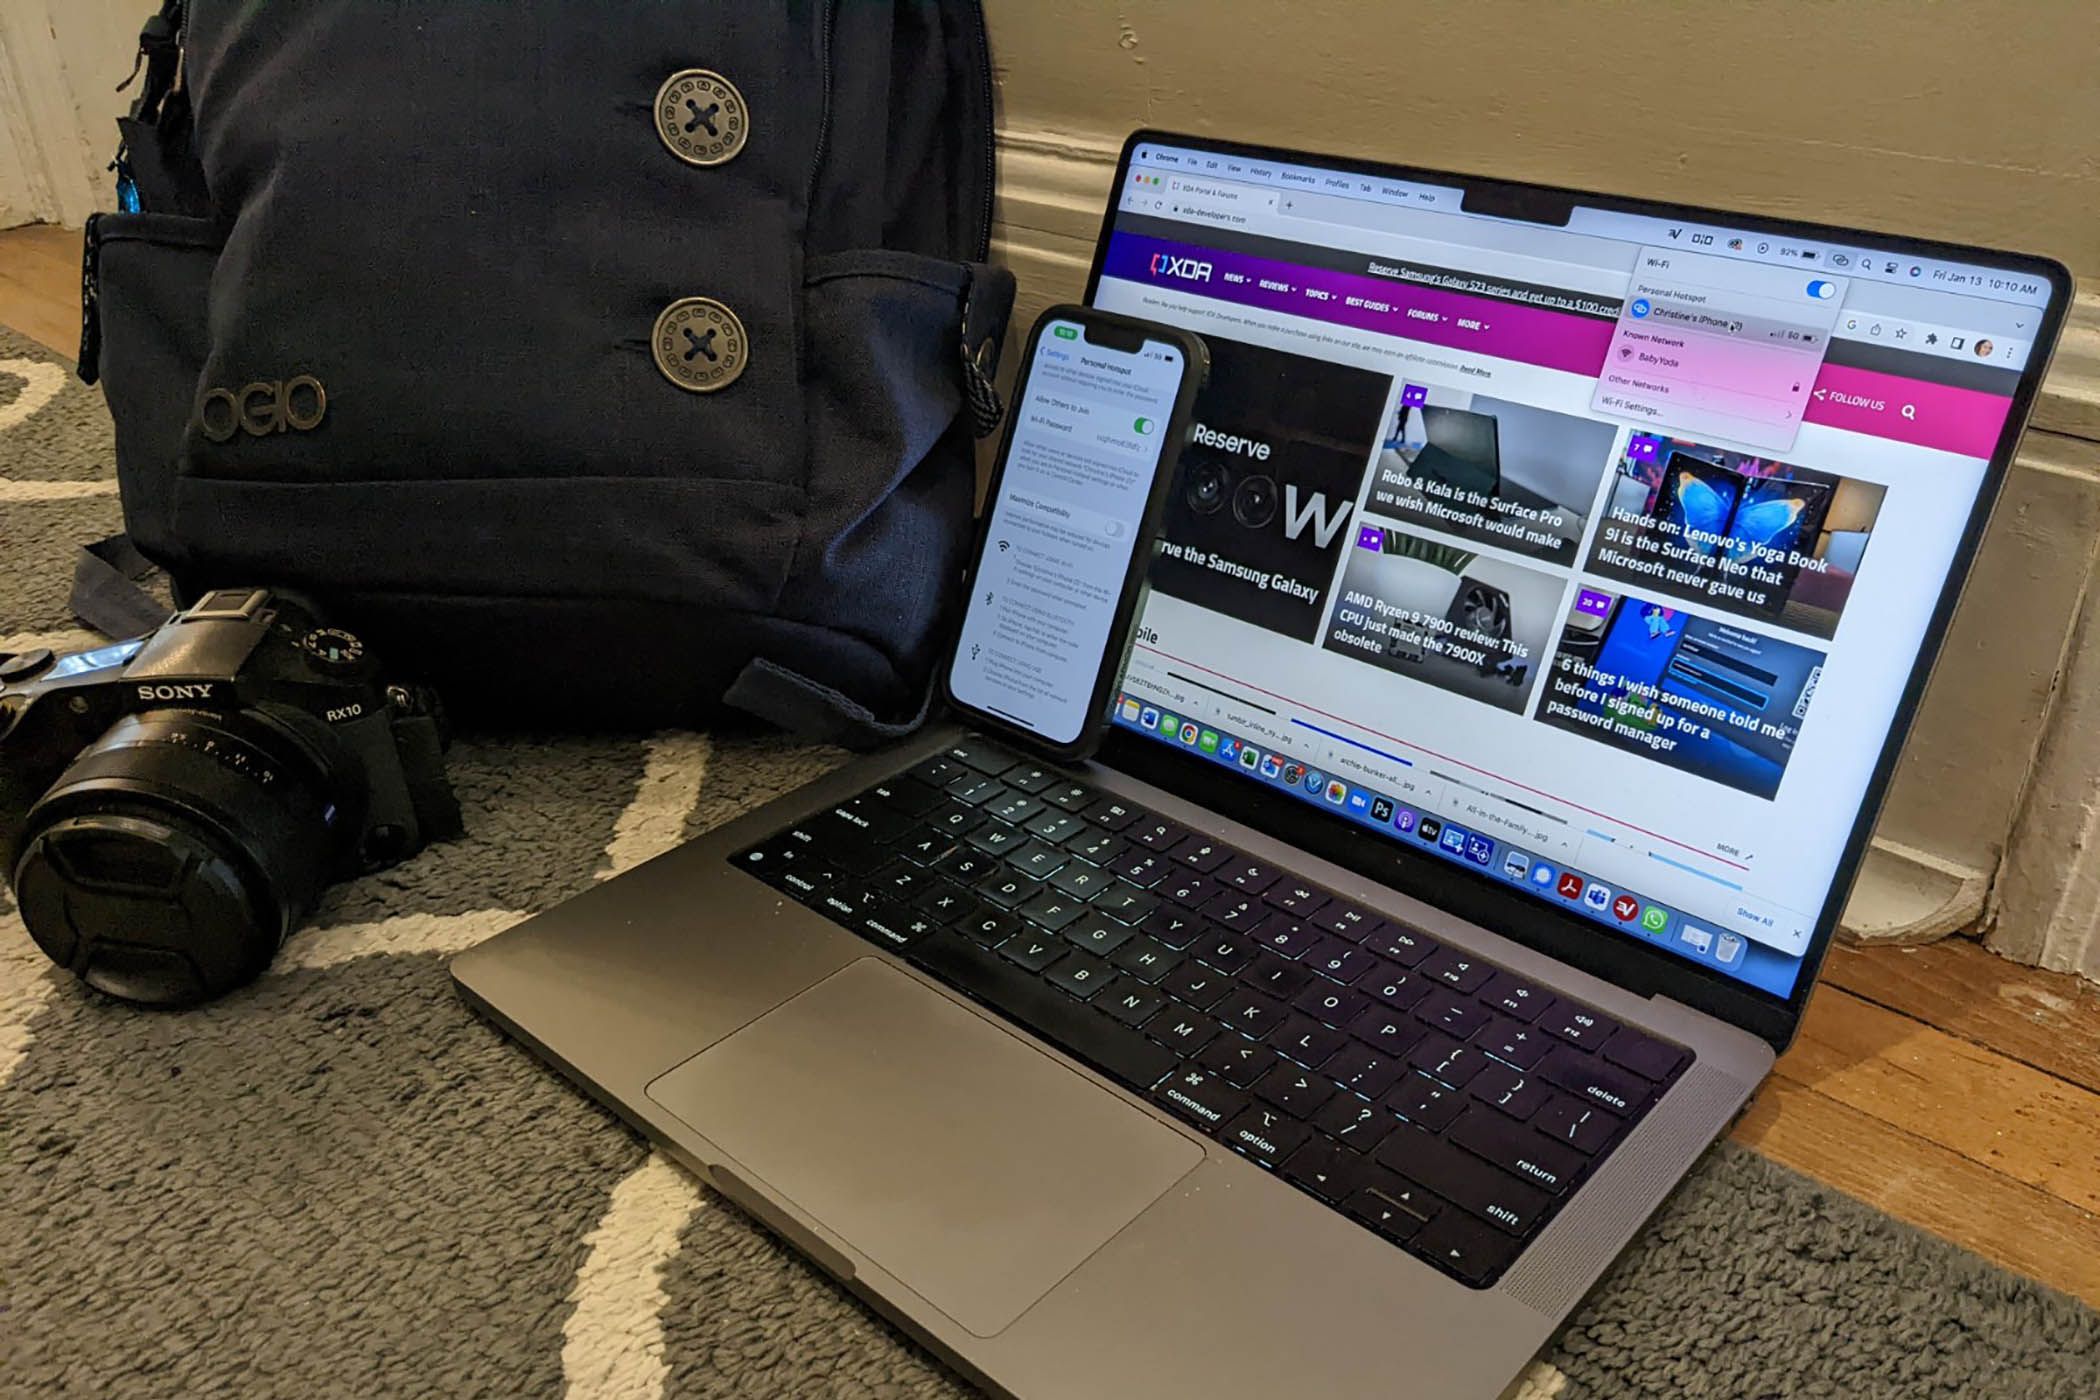 MacBook with iPhone, backpack, and camera.